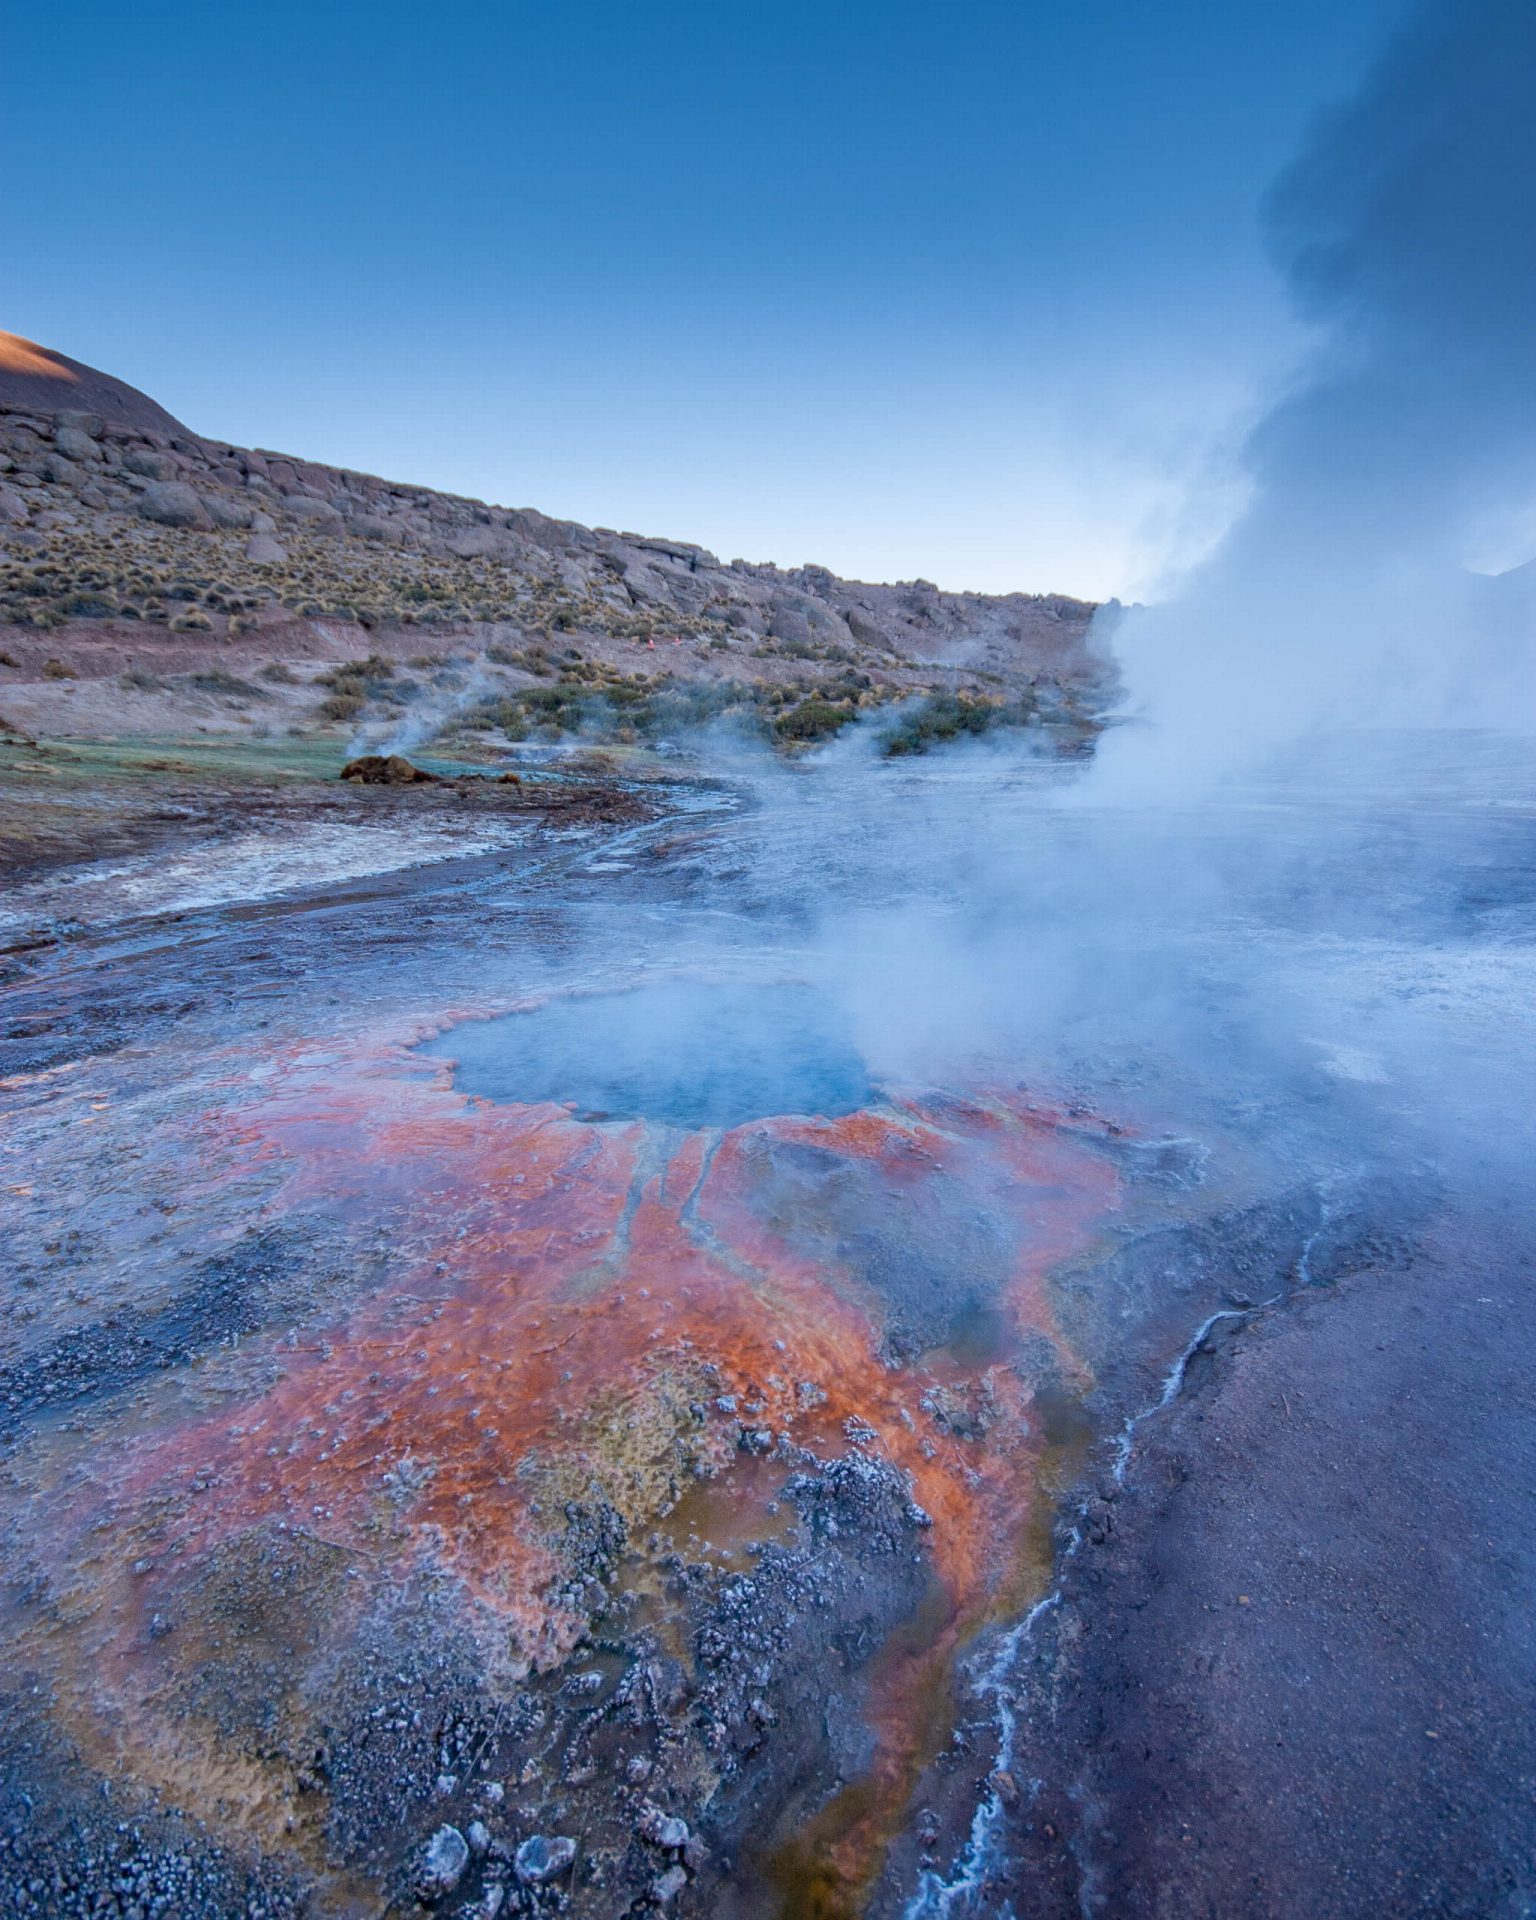 Colorful mineral deposits can be seen in El Tatio Geyser field in Chile.